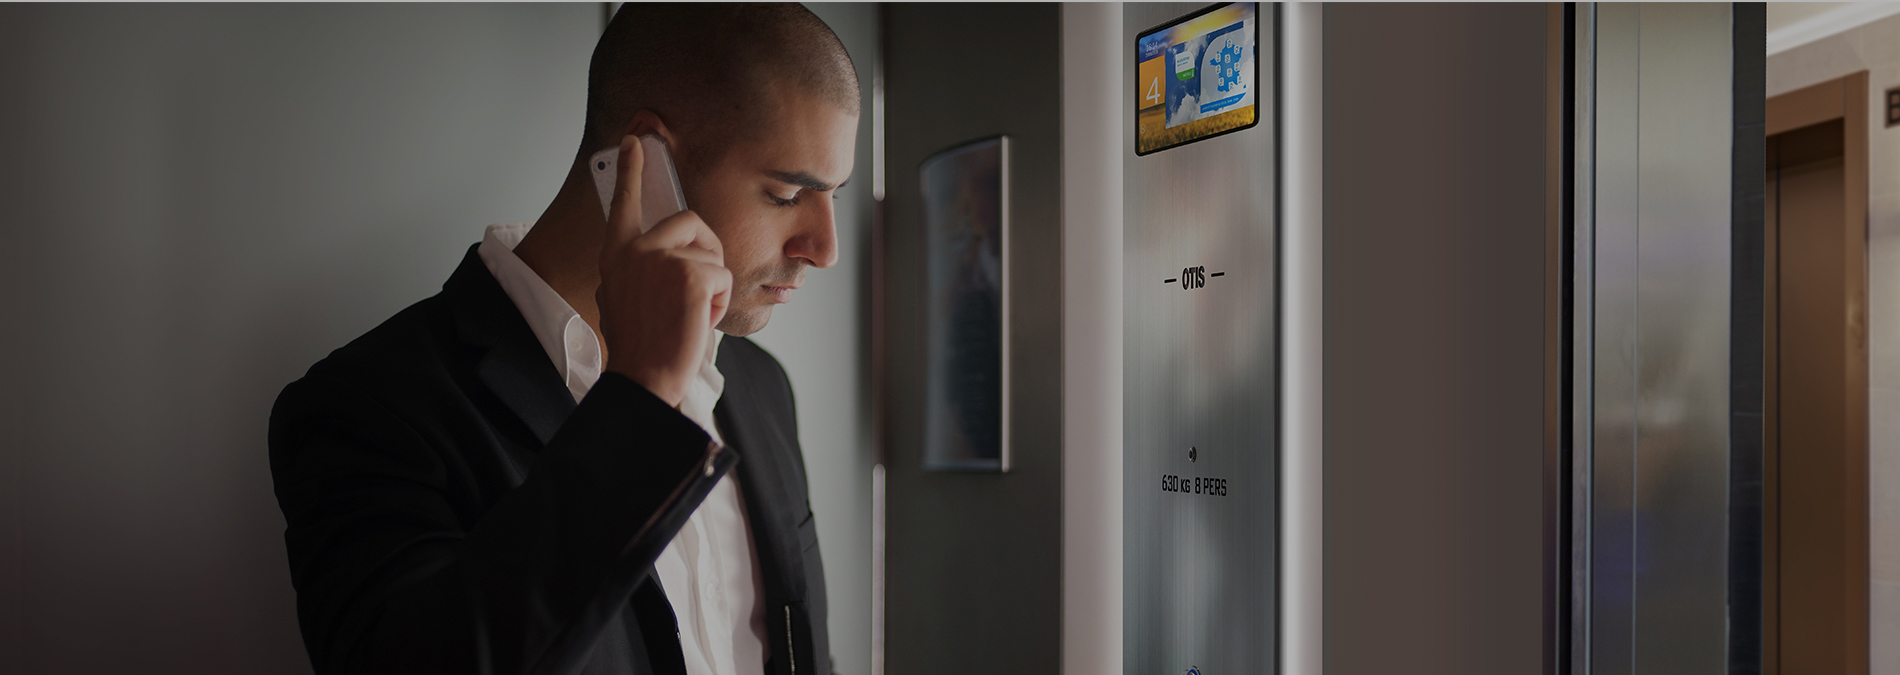 man-on-phone-in-lift-1900x675